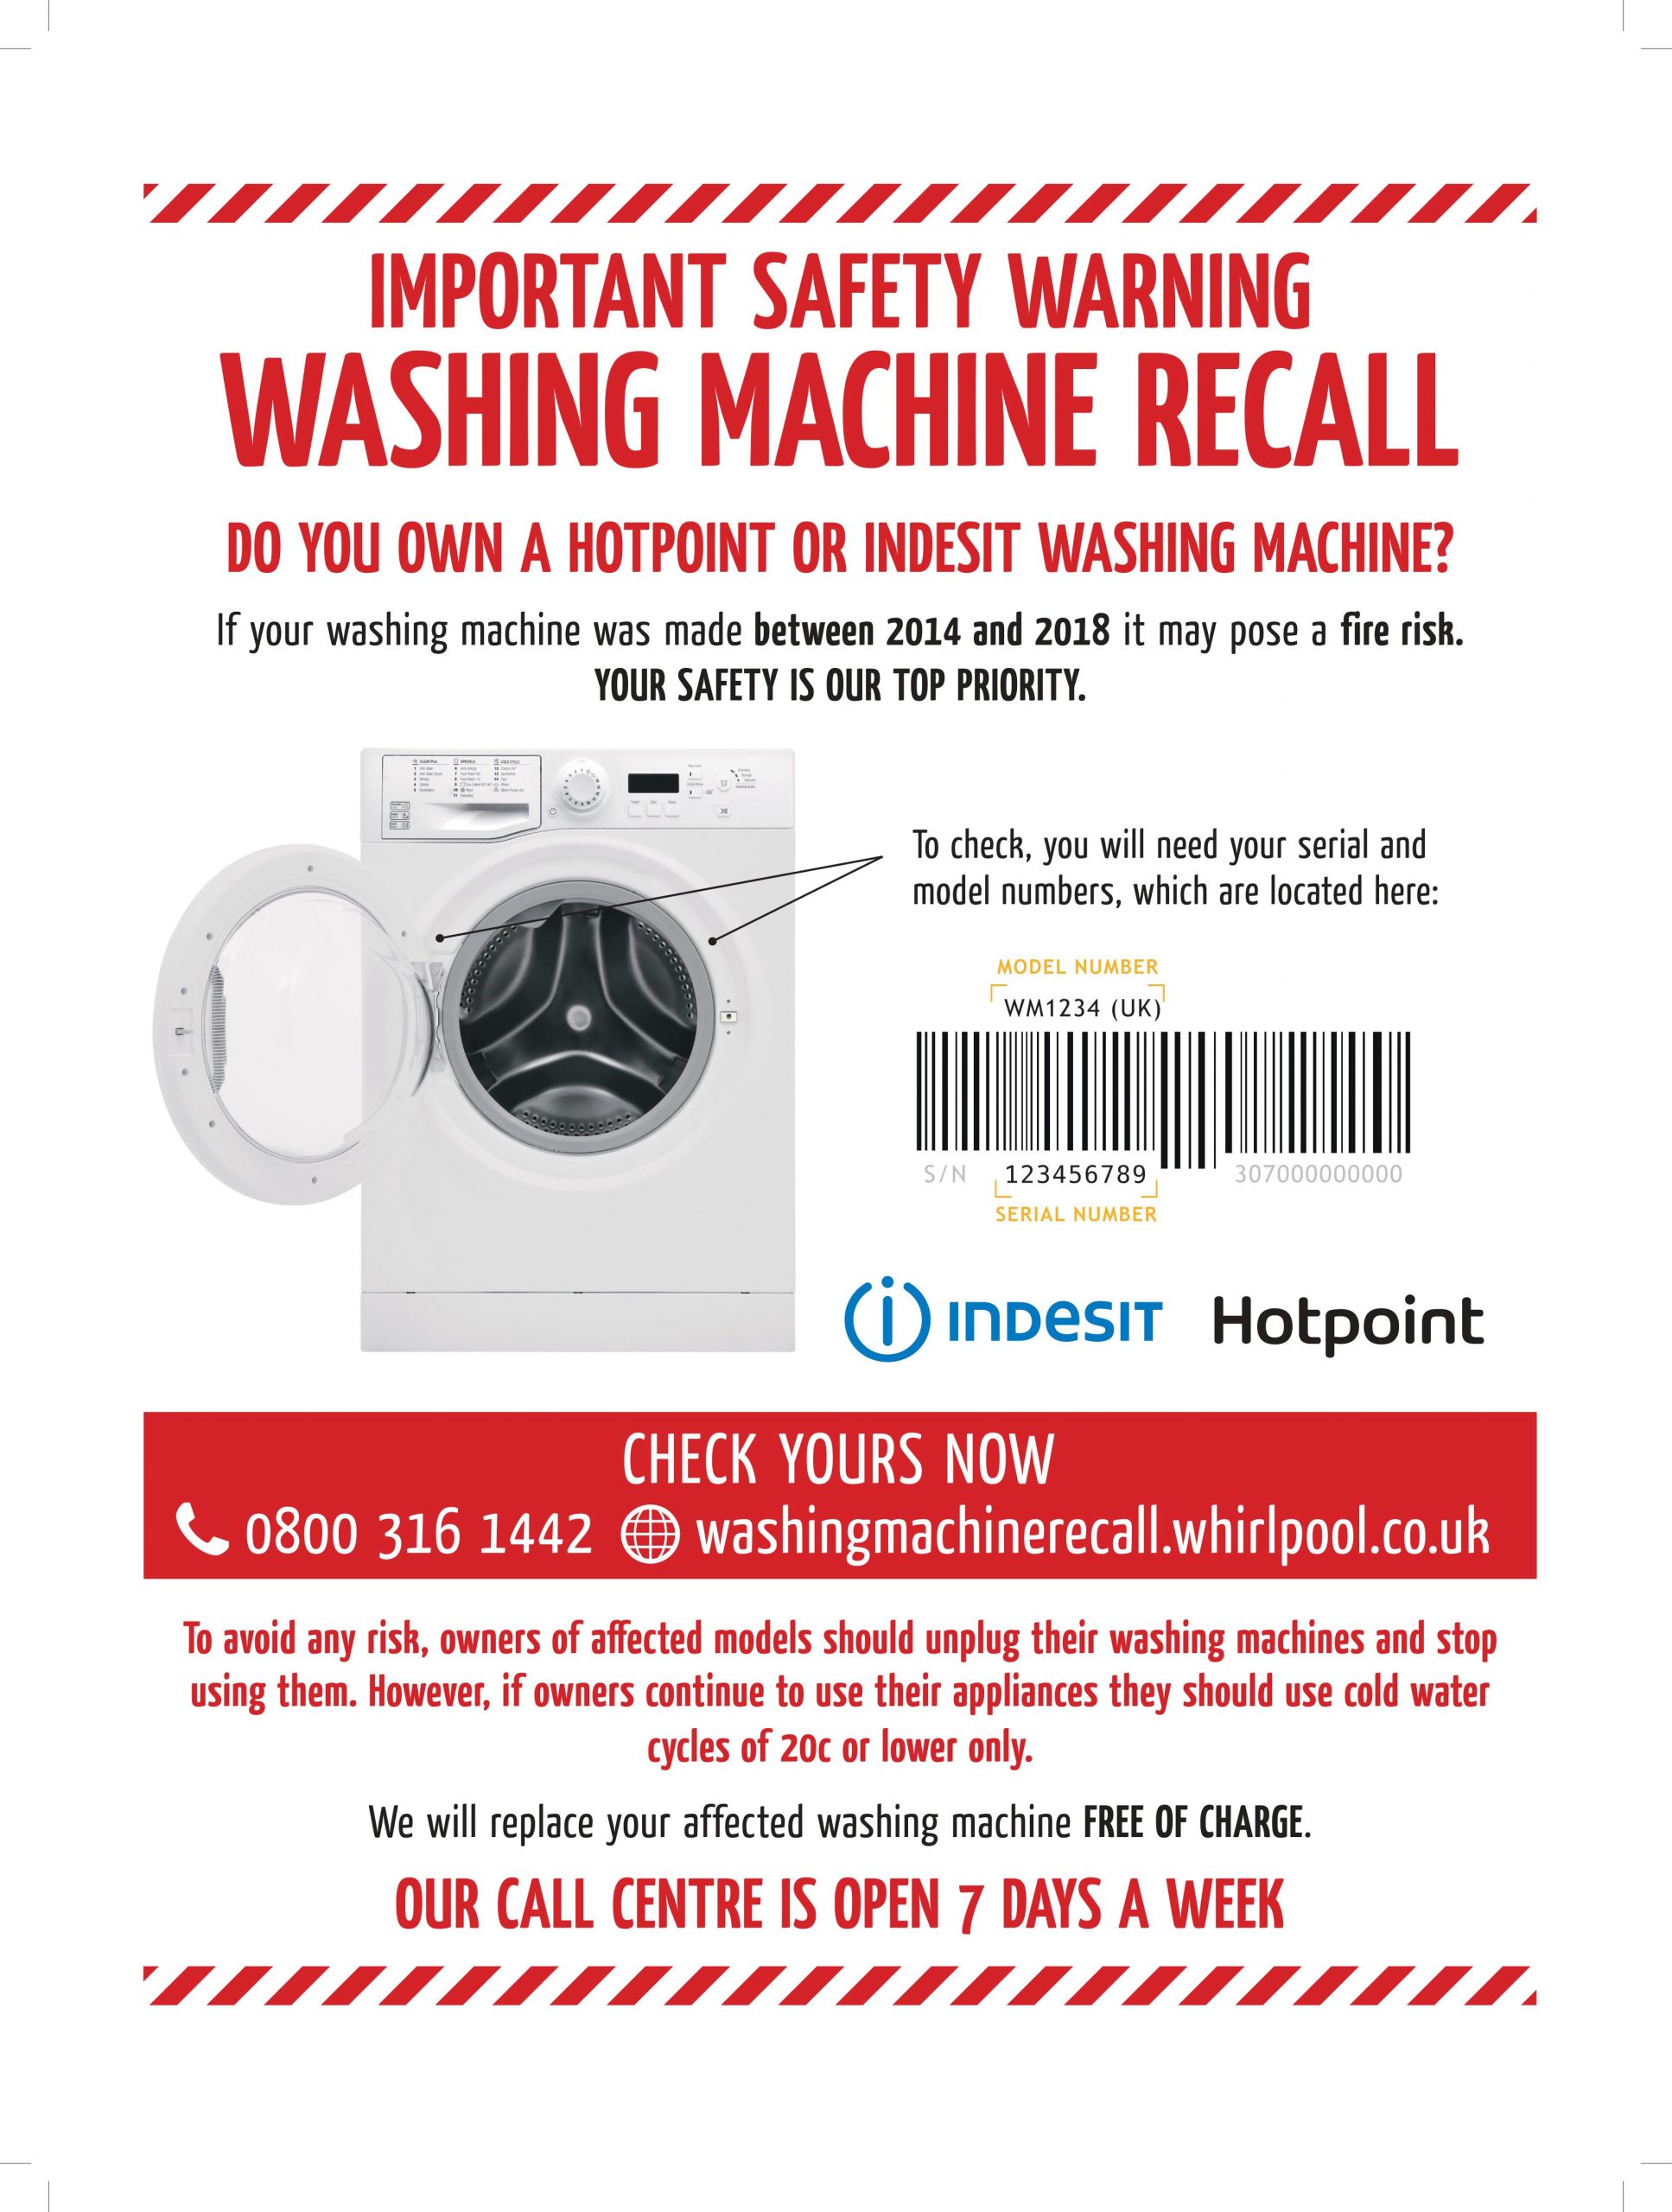 Whirlpool Washing Machine Recall - are you affected?